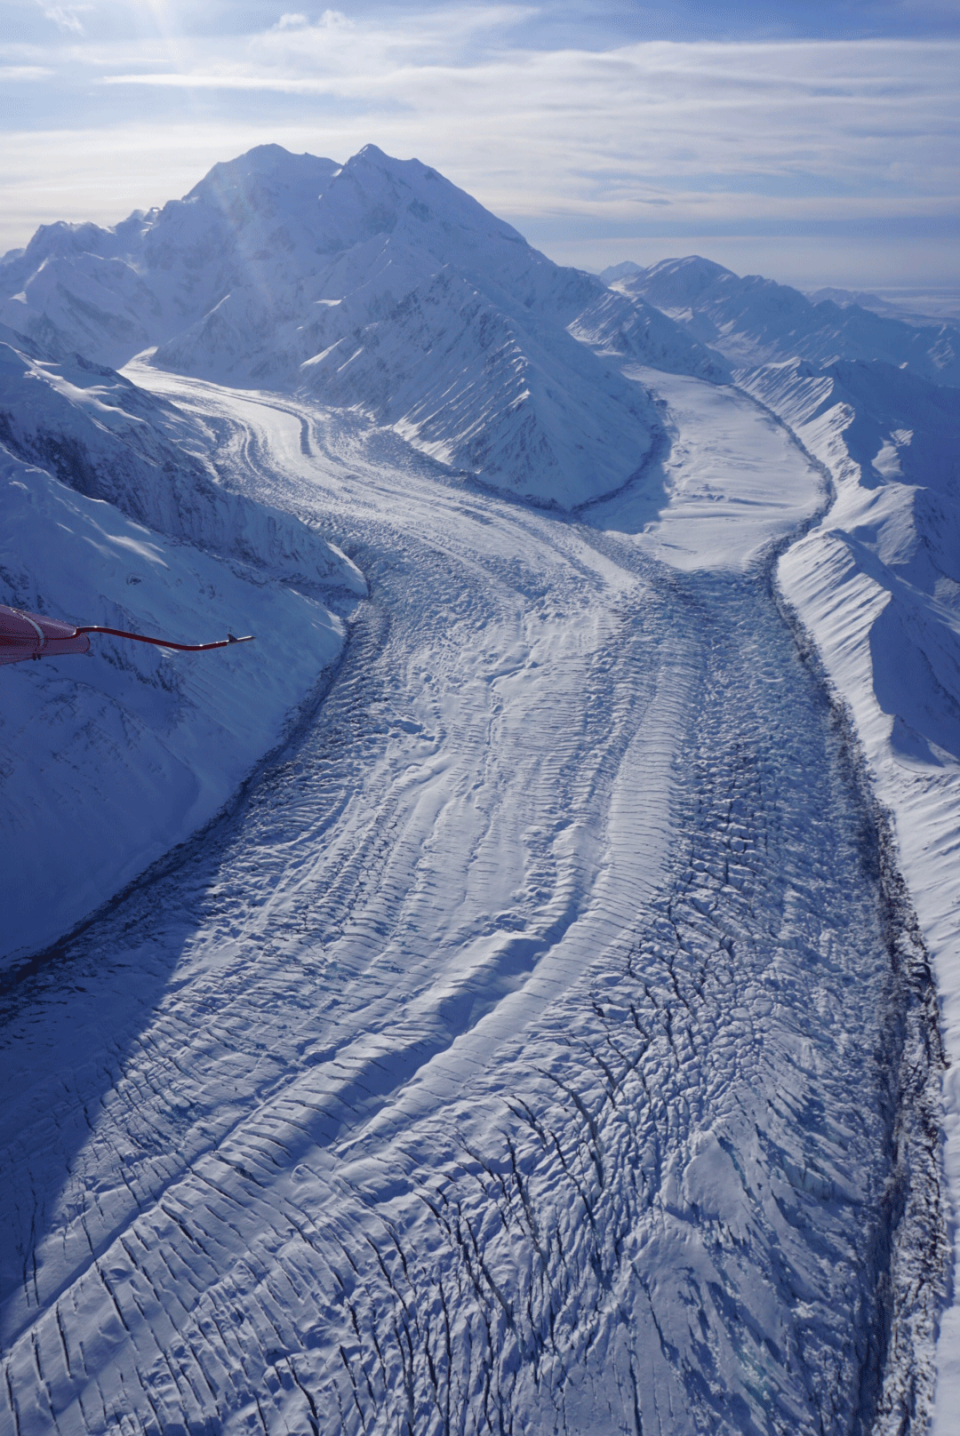 The Muldrow glacier flowing off the Denali peak in Alaska, has begun moving at 10 to 100 times faster than its normal speed.